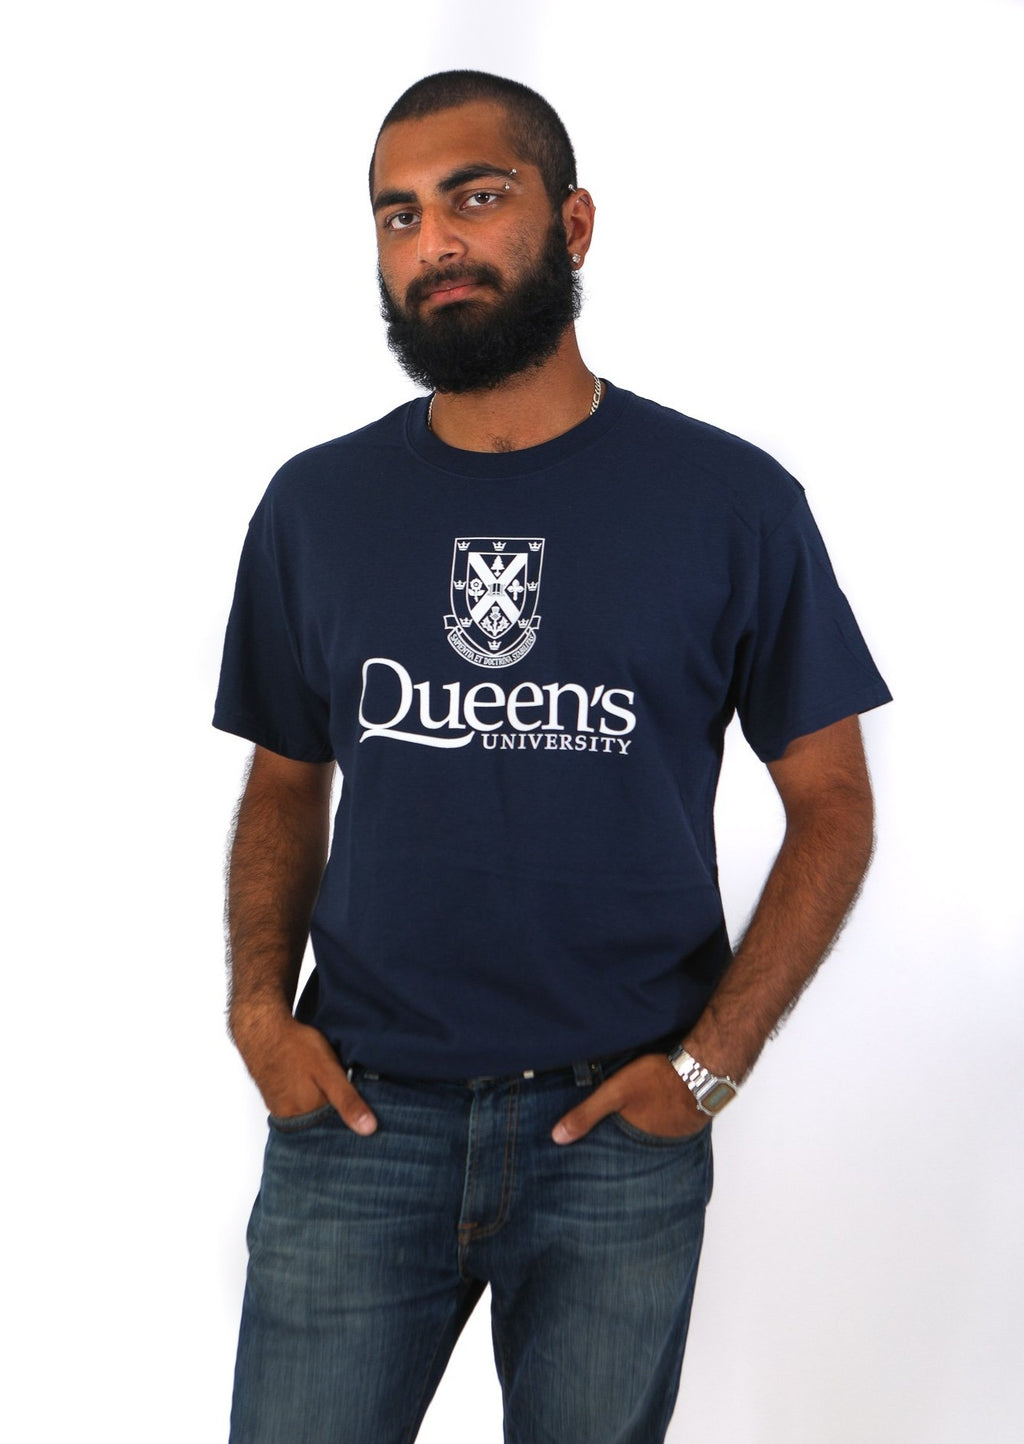 Navy tshirt with white queens crest